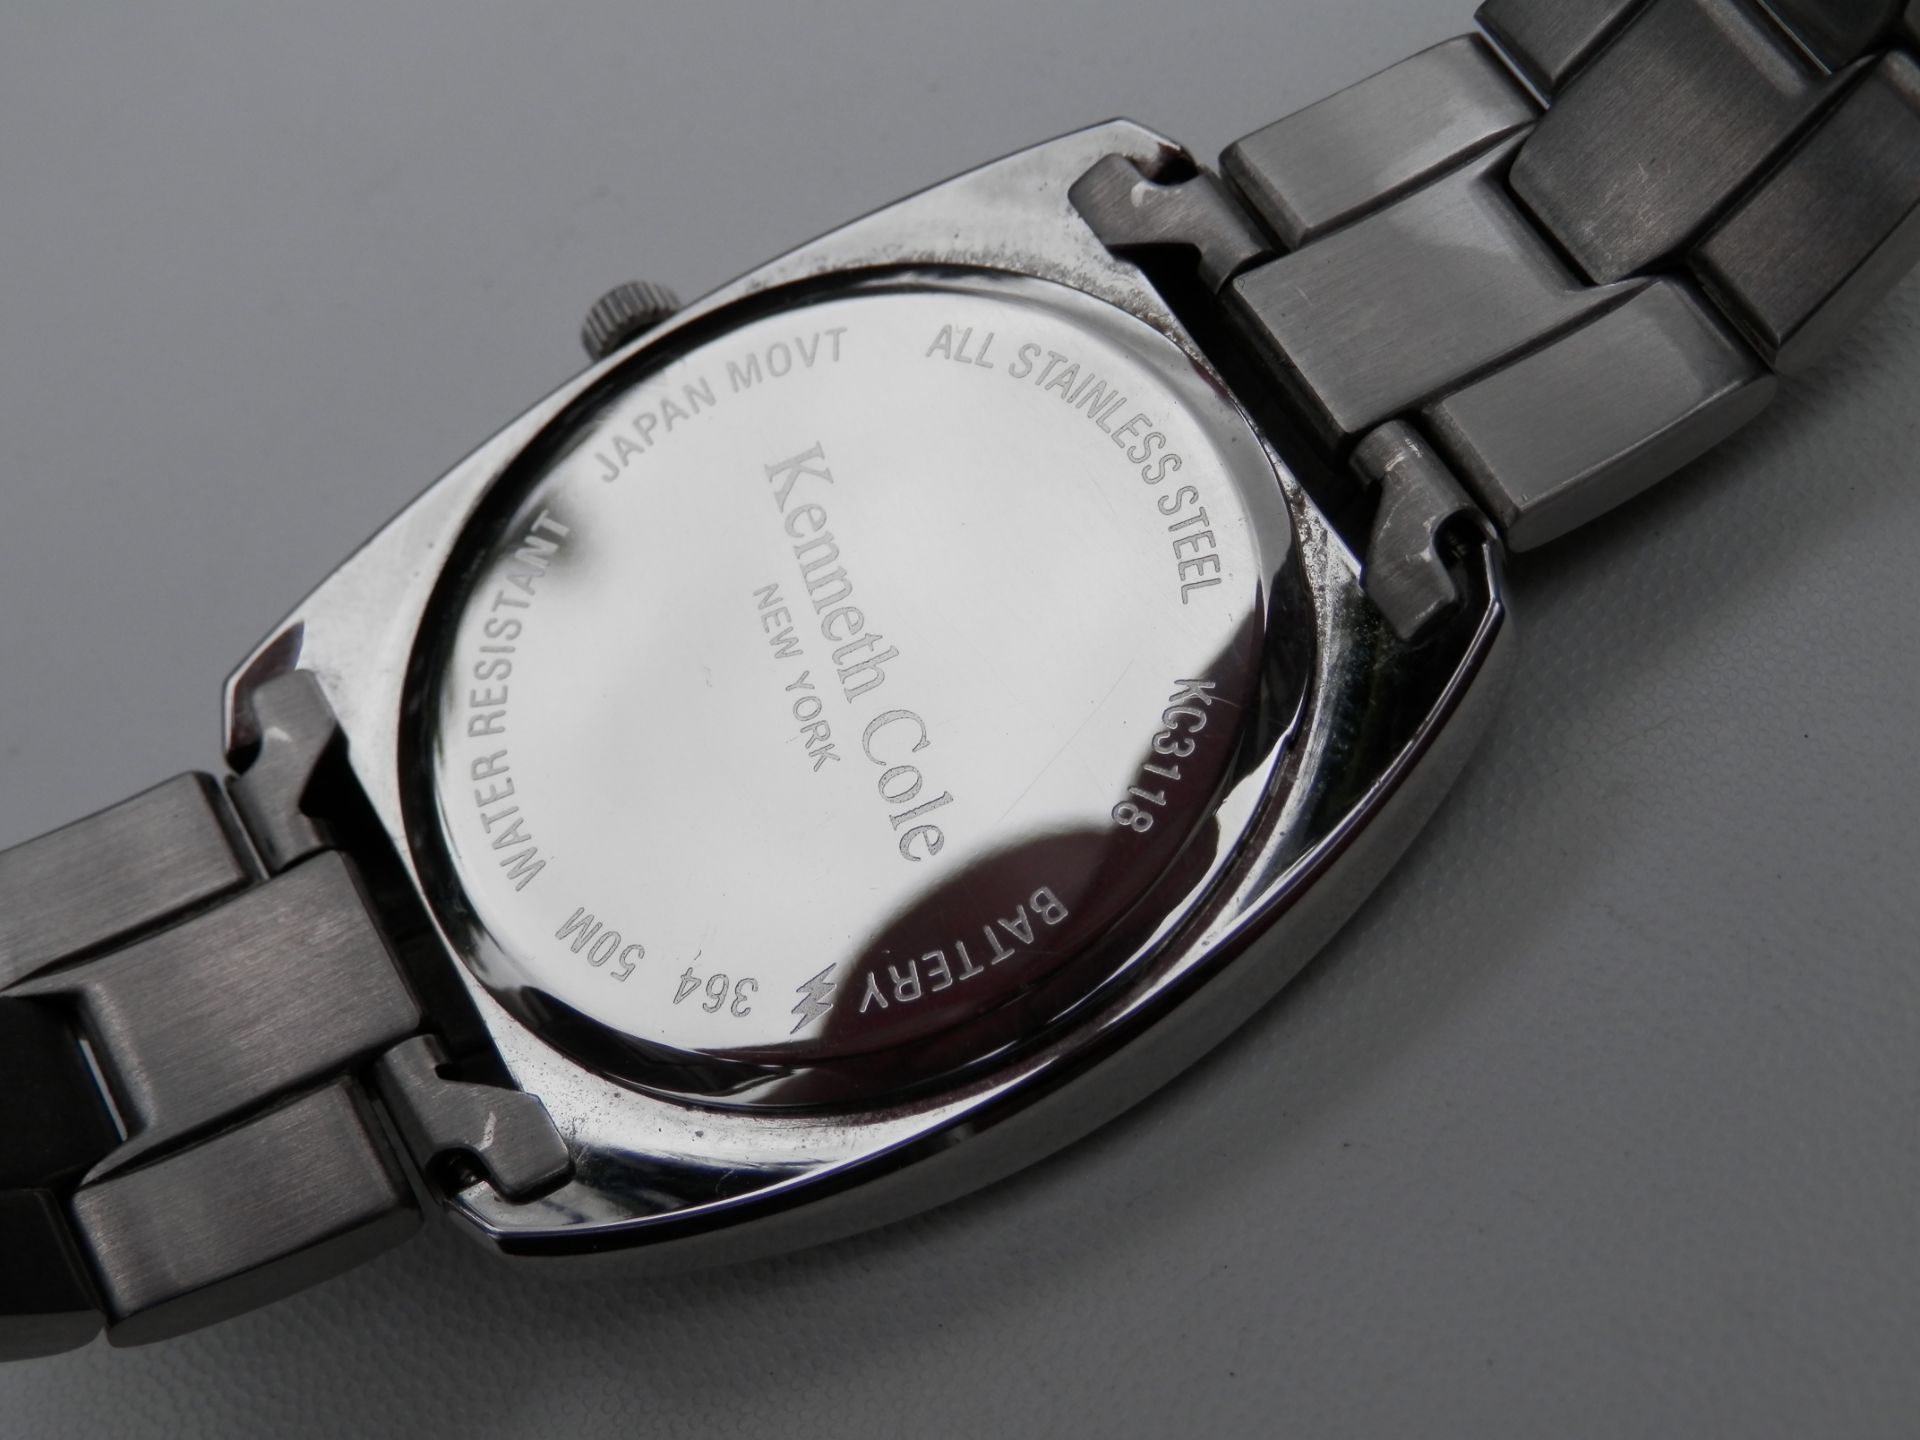 GENTS BOXED KENNETH COLE NEW YORK, FULL STAINLESS 50M WR QUARTZ DATE WATCH, FULLY WORKING. RRP $125 - Image 7 of 8